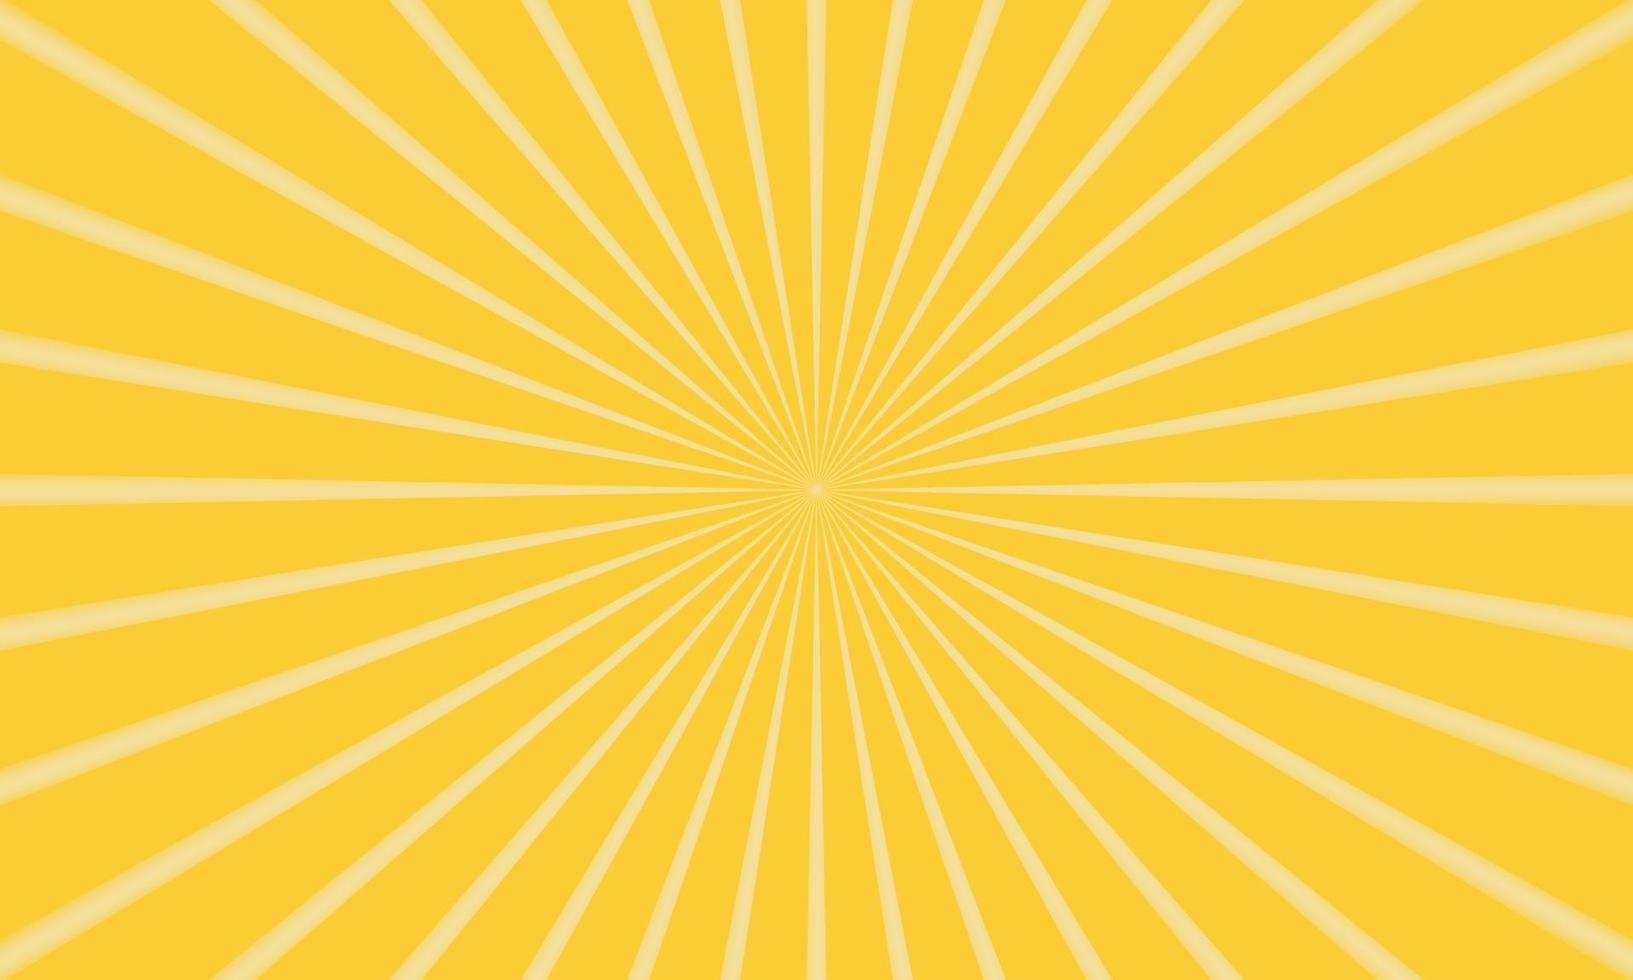 abstract background with rays of sun vector